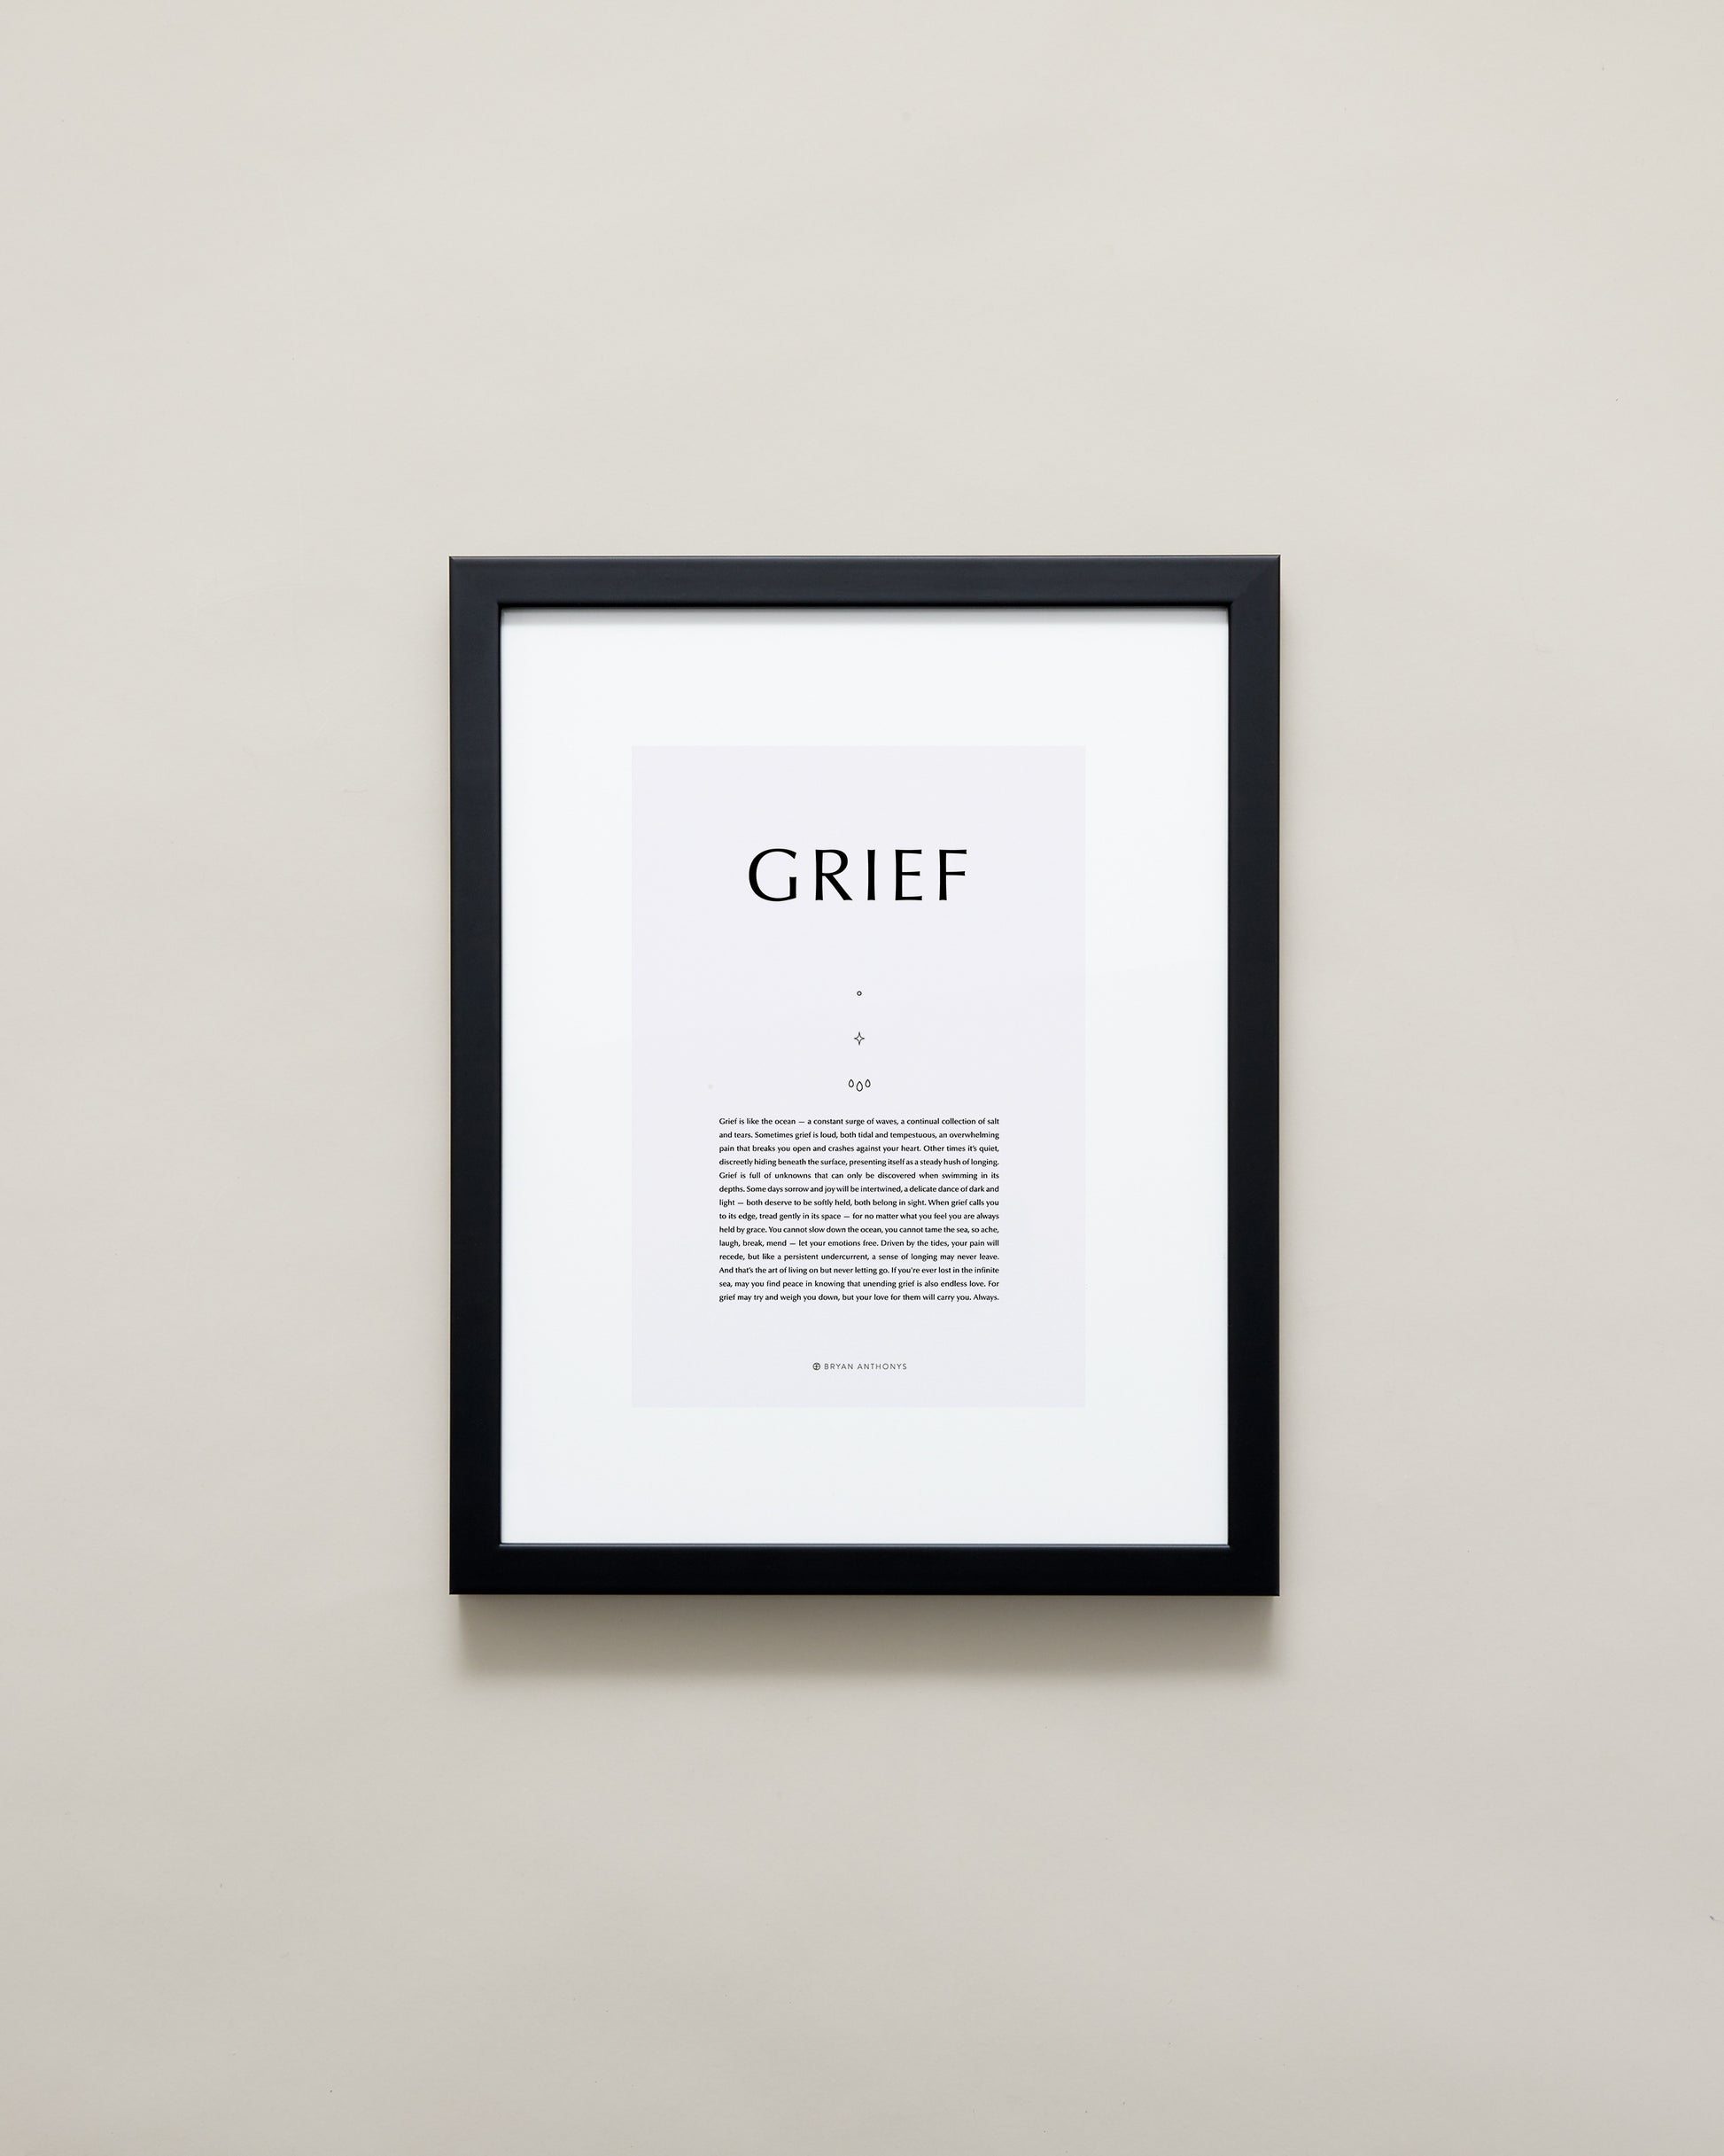 Bryan Anthonys Home Decor Purposeful Prints Grief Iconic Framed Print Gray Art With Black Frame 11x14